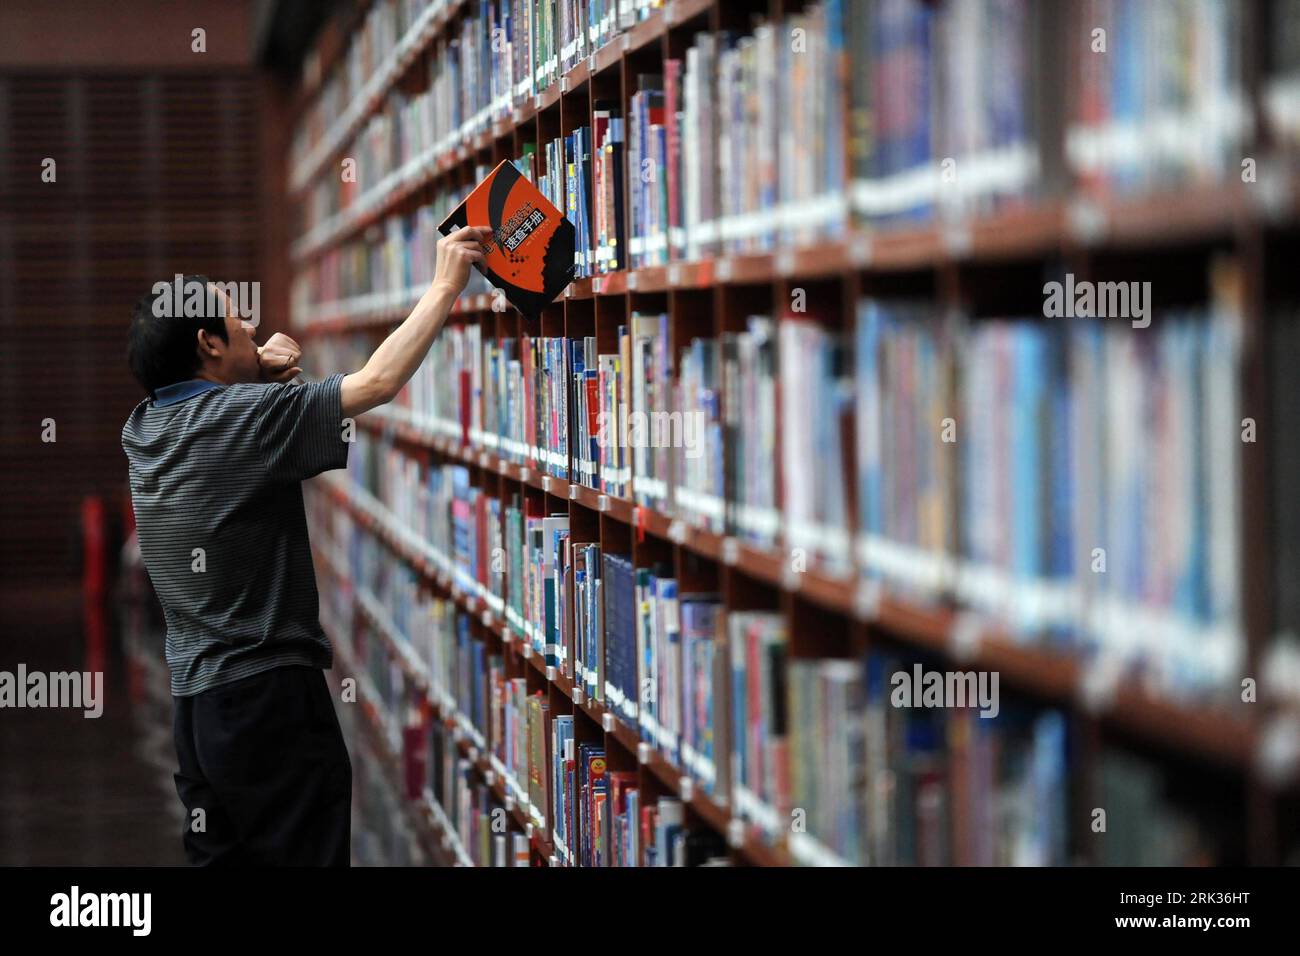 Bildnummer: 53333699  Datum: 09.09.2009  Copyright: imago/Xinhua (090909) -- BEIJING, Sept. 9, 2009 (Xinhua) -- A citizen browses books at the National Library of China in Beijing, capital of China, Sept. 9, 2009. The national library originated on Sept. 9, 1909, when the government of Qing Dynasty (1644-1911) authorized preparations for constructing the Capital Library. A series of activities were held to celebrate its 100th anniversary on Wednesday. (Xinhua/Jin Liangkuai) (cy) (4)CHINA-BEIJING-NATIONAL LIBRARY-100TH ANNIVERSARY (CN) PUBLICATIONxNOTxINxCHN Bibliothek Nationalbibliothek Peking Stock Photo